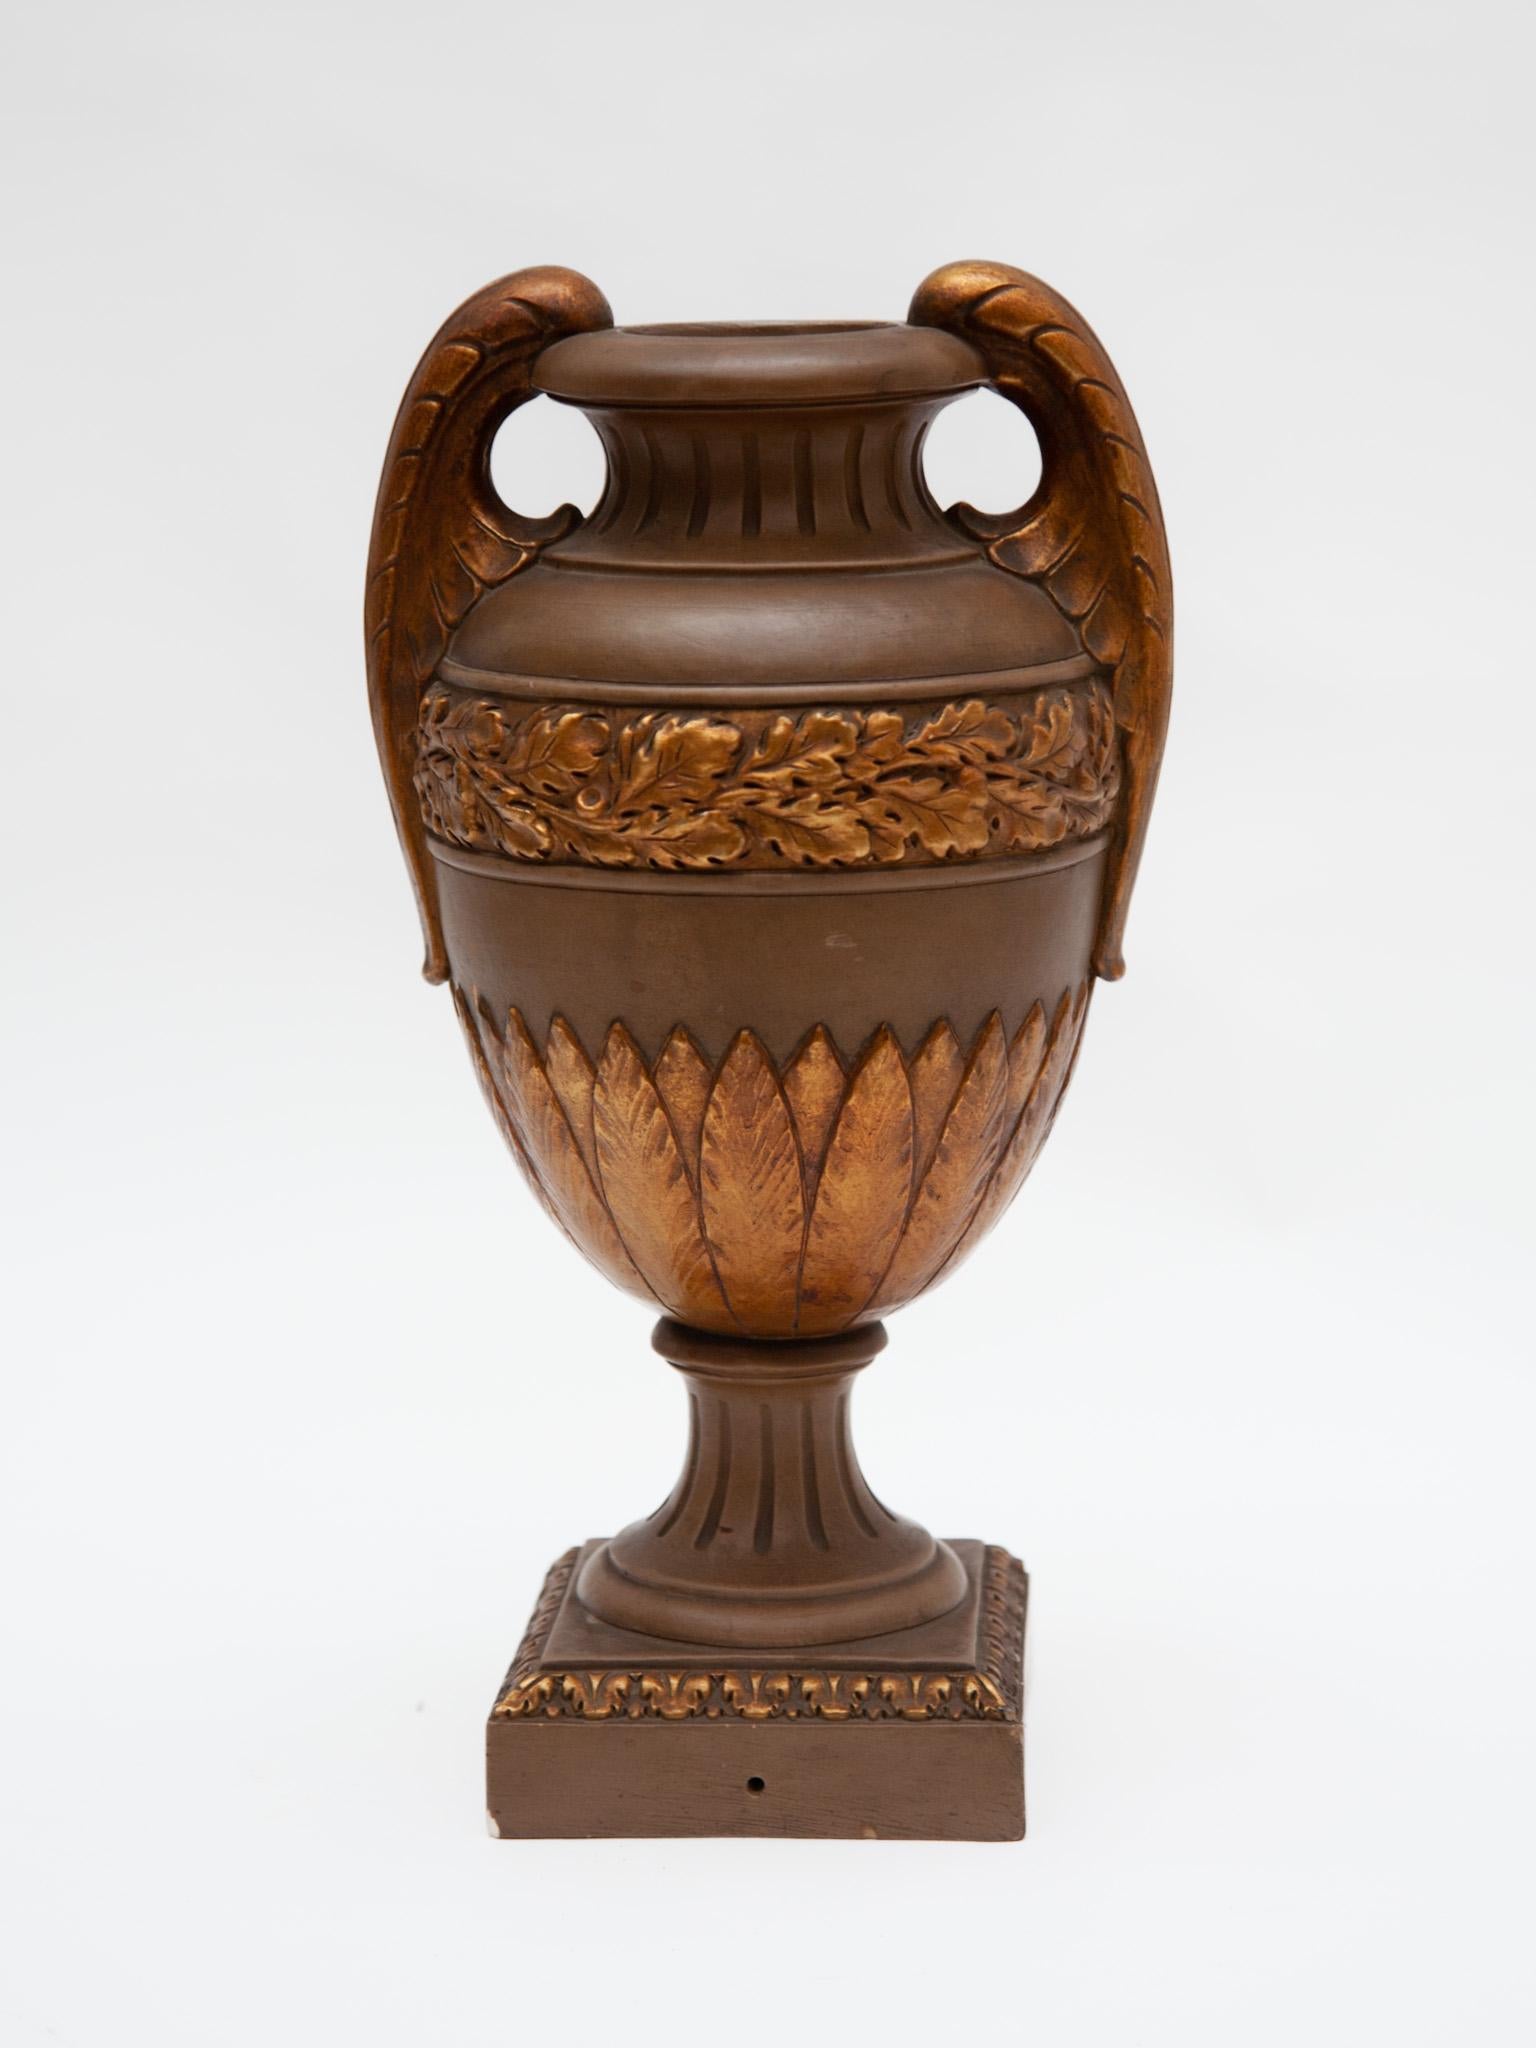 Antique ceramic Amphora Classism vase with gilded oak leafs and palmettes executed, made in Austria 19th Century.